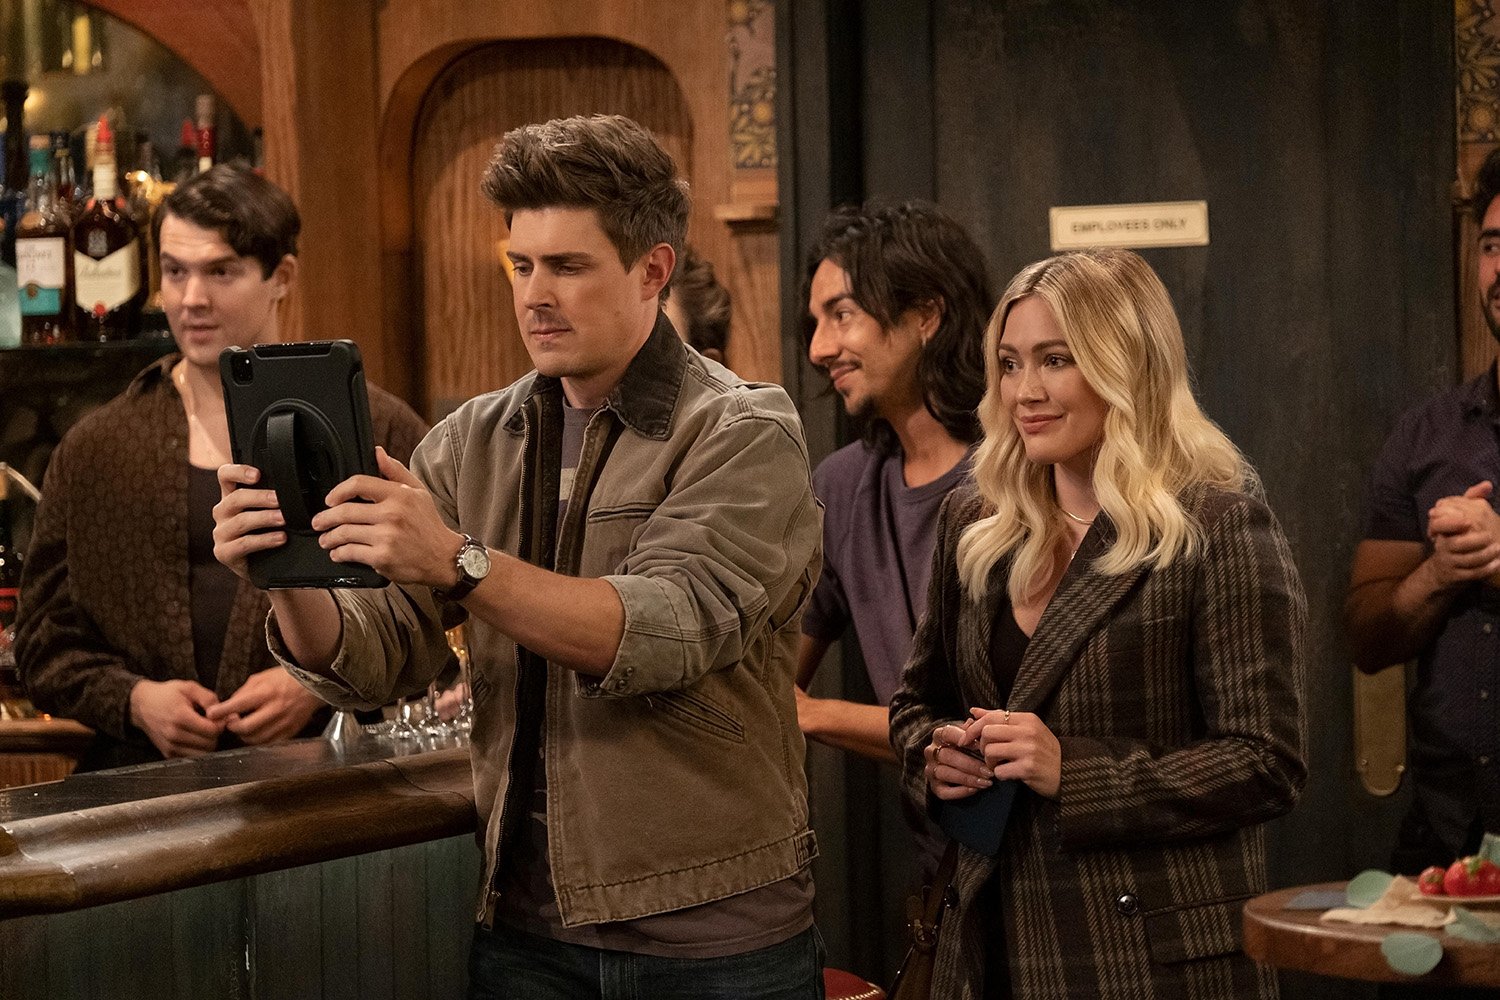 Chris Lowell as Jesse and Hilary Duff as Sophie in How I Met Your Father Episode 1